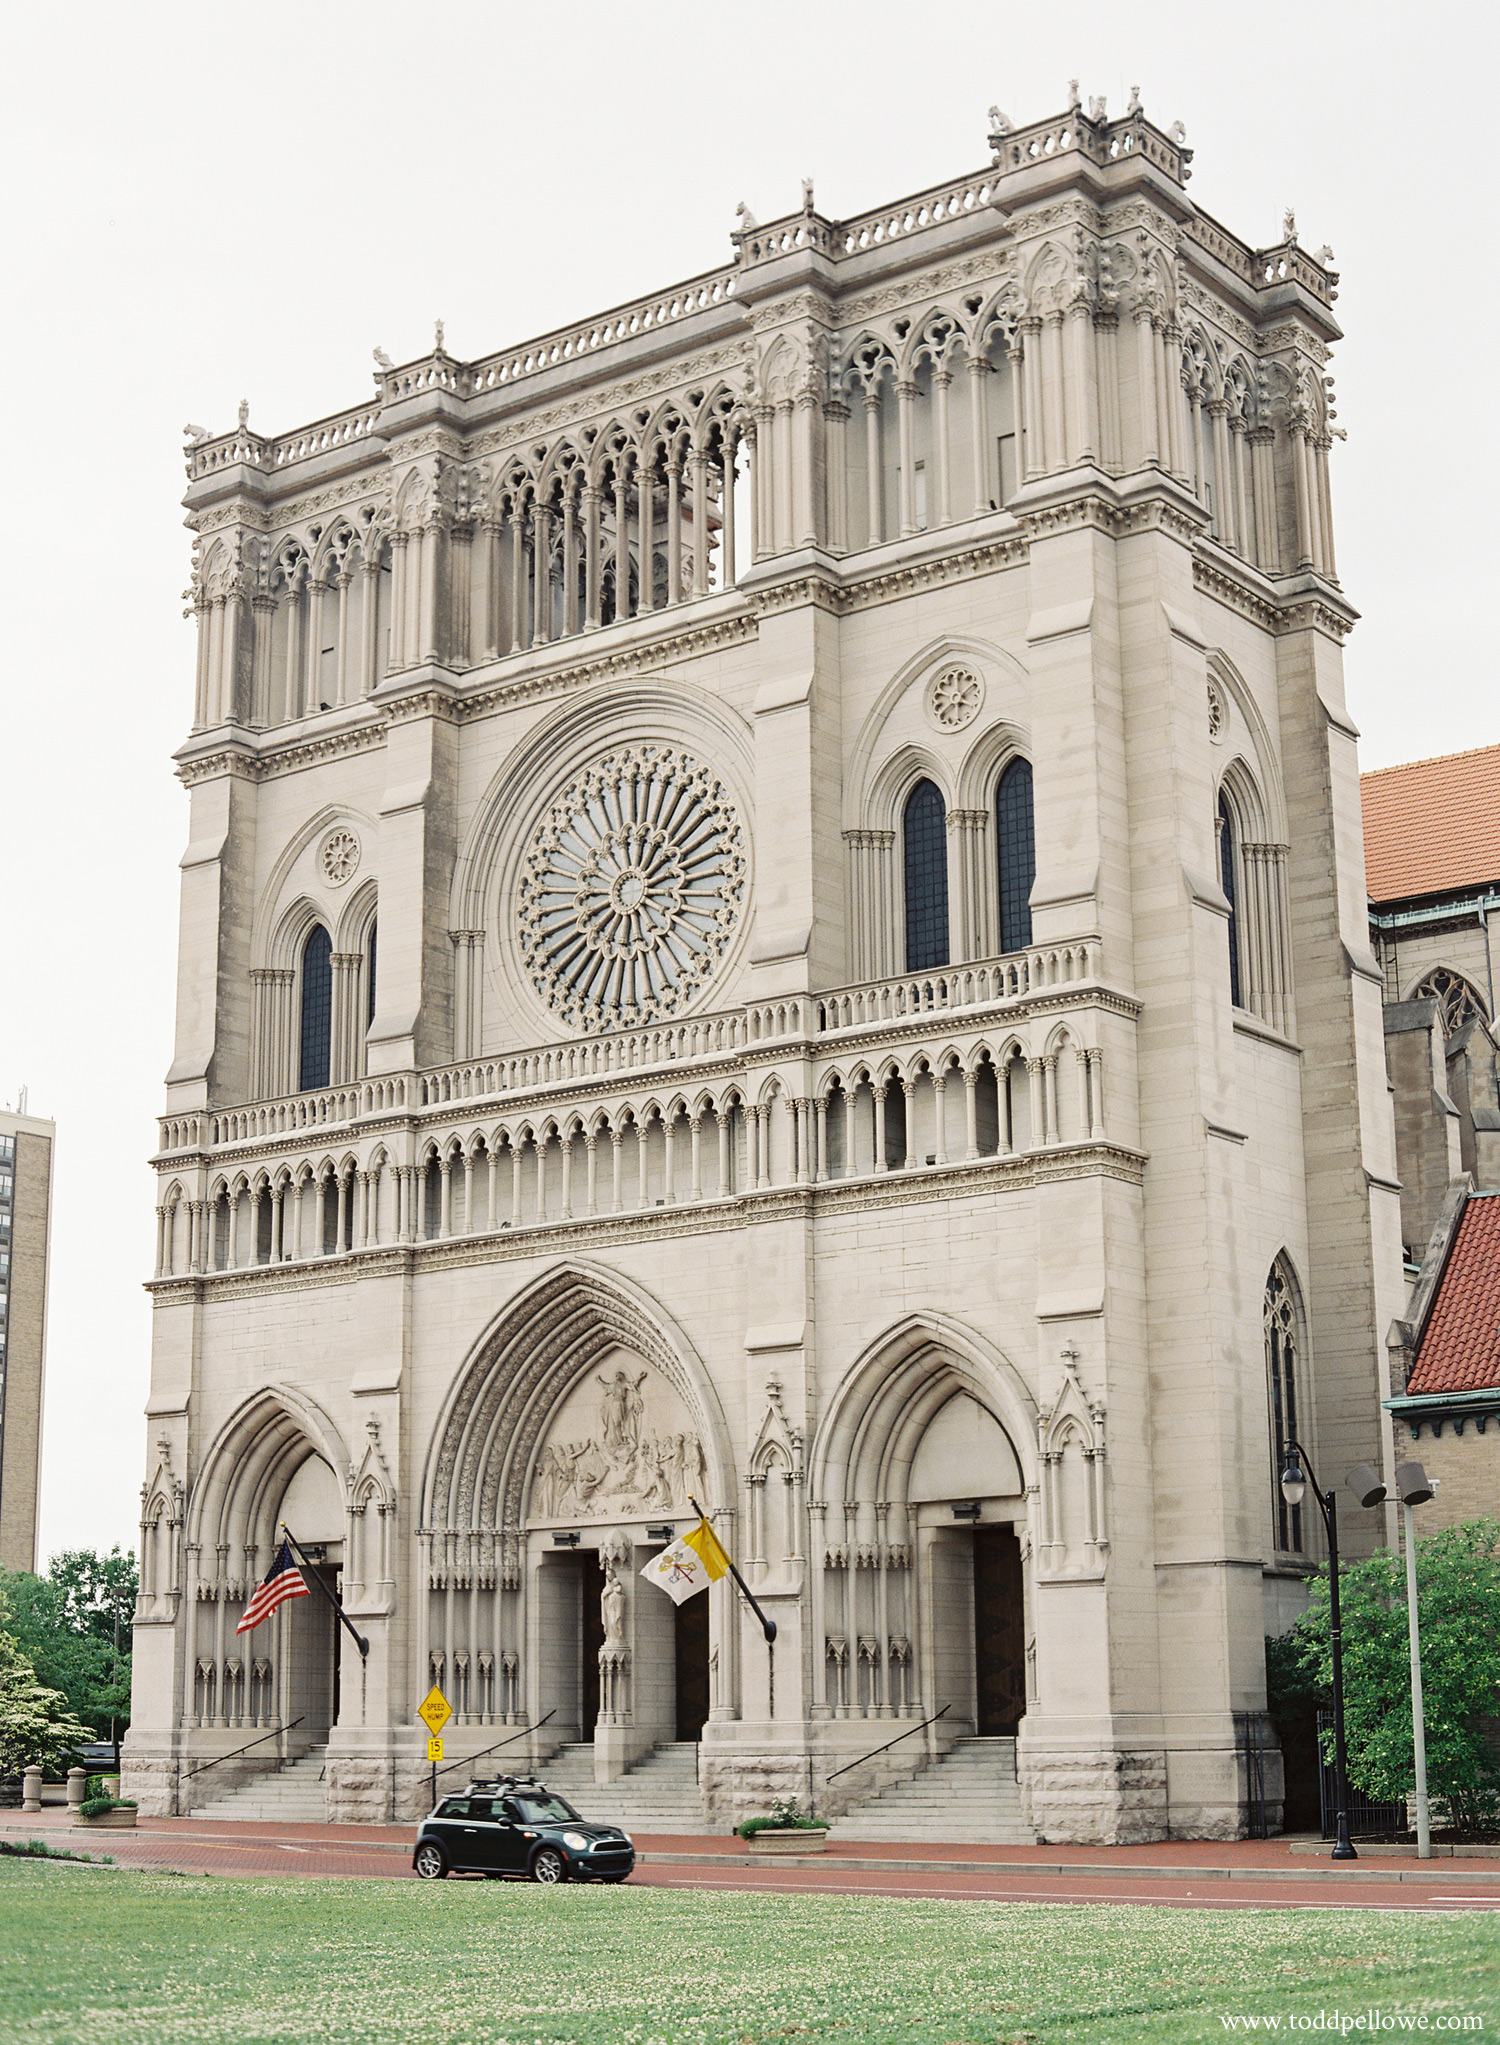 Cathedral Basilica of the Assumption in Covington